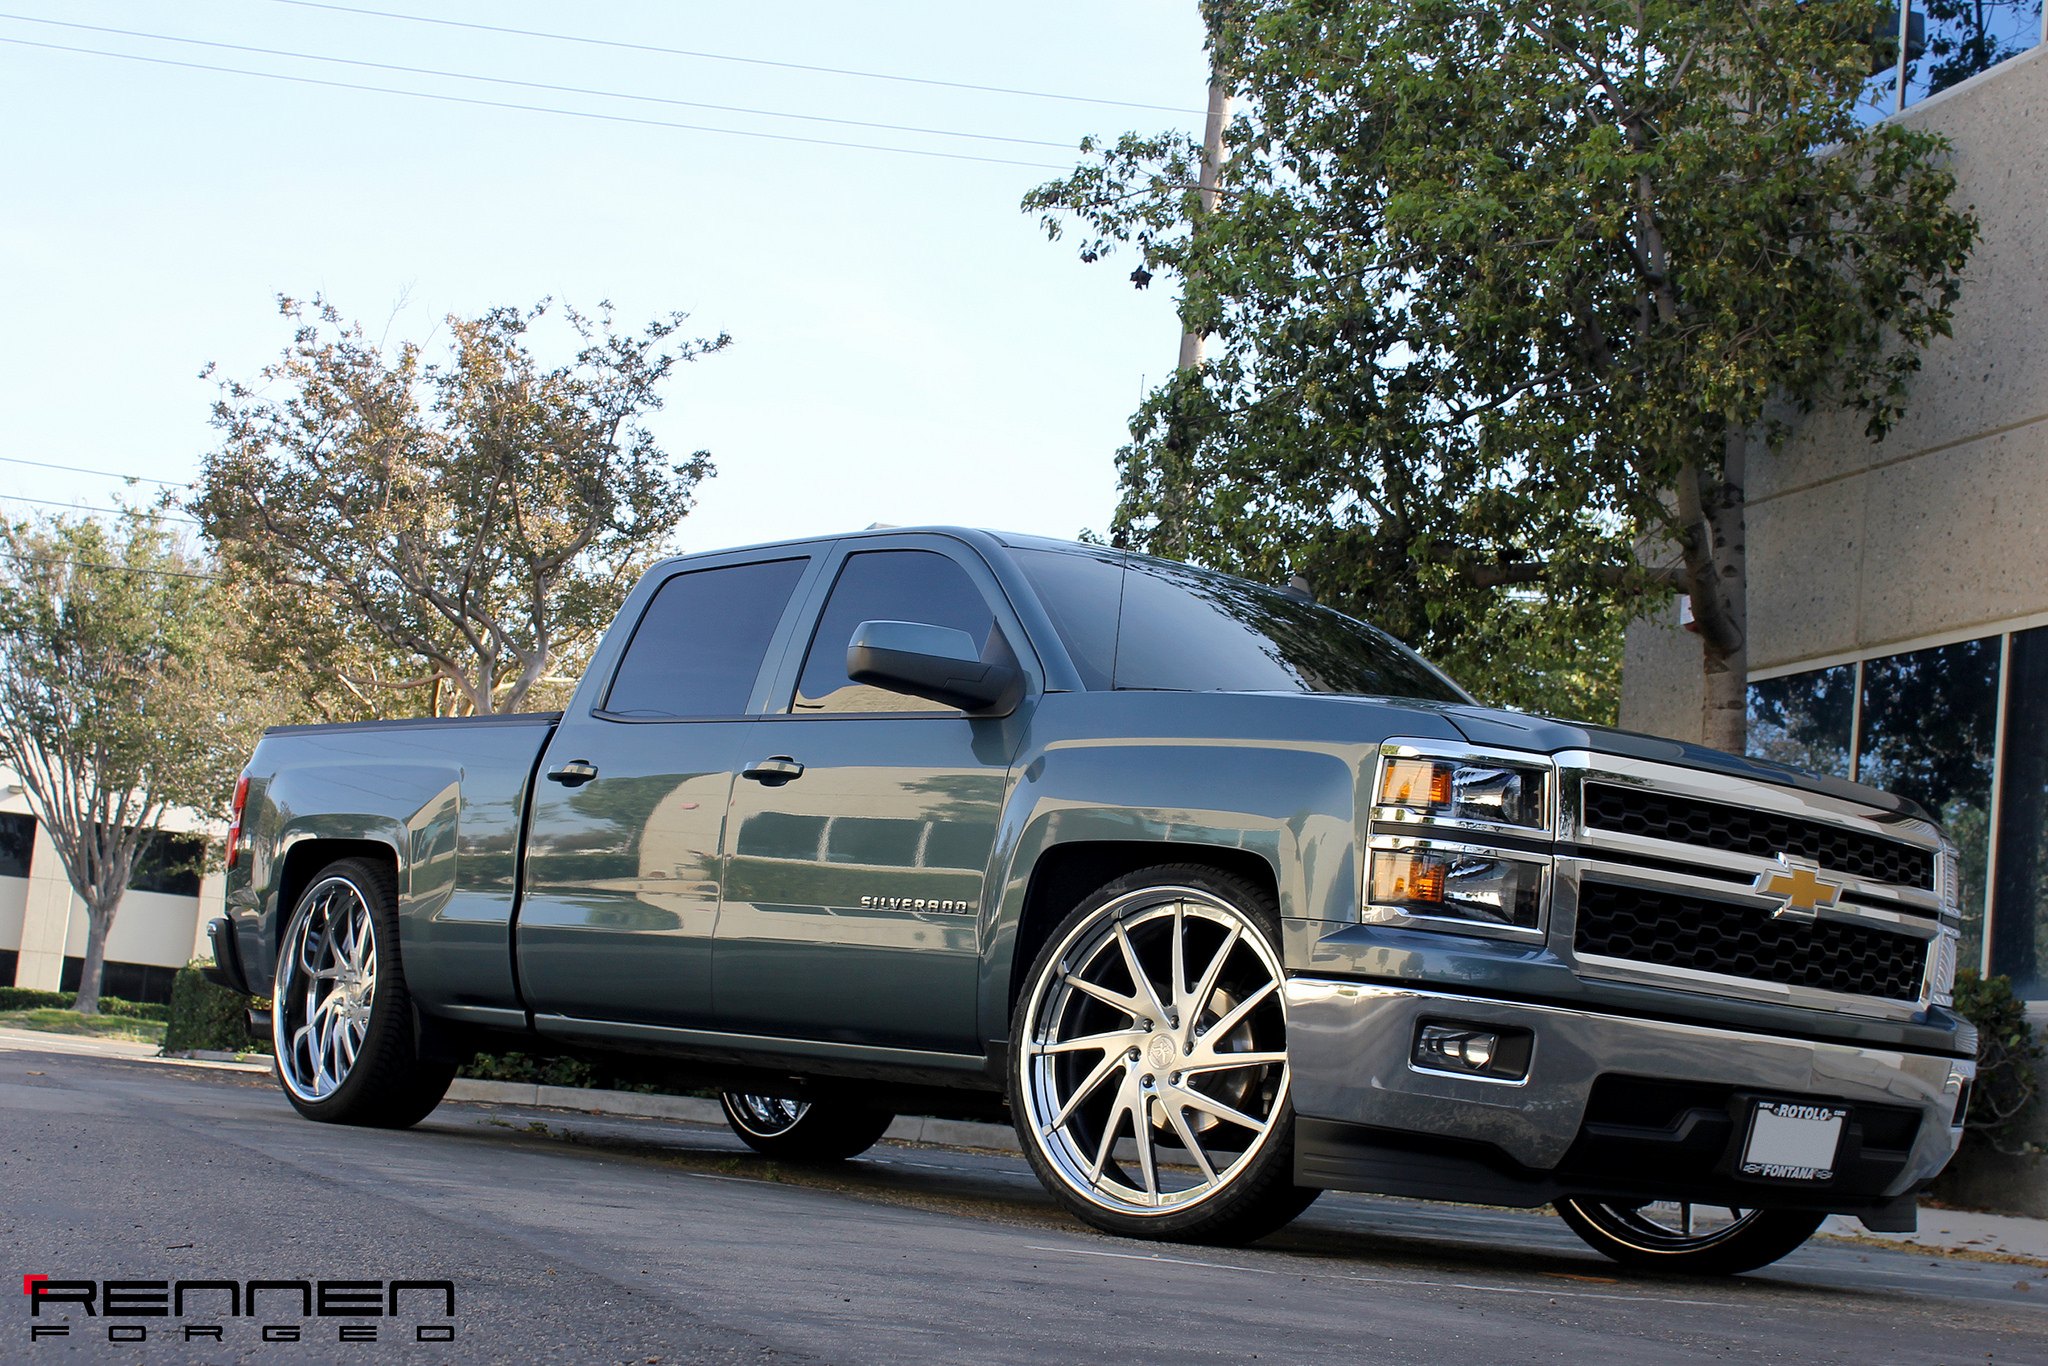 Gray Chevy Silverado with Chrome Grille - Photo by Rennen International